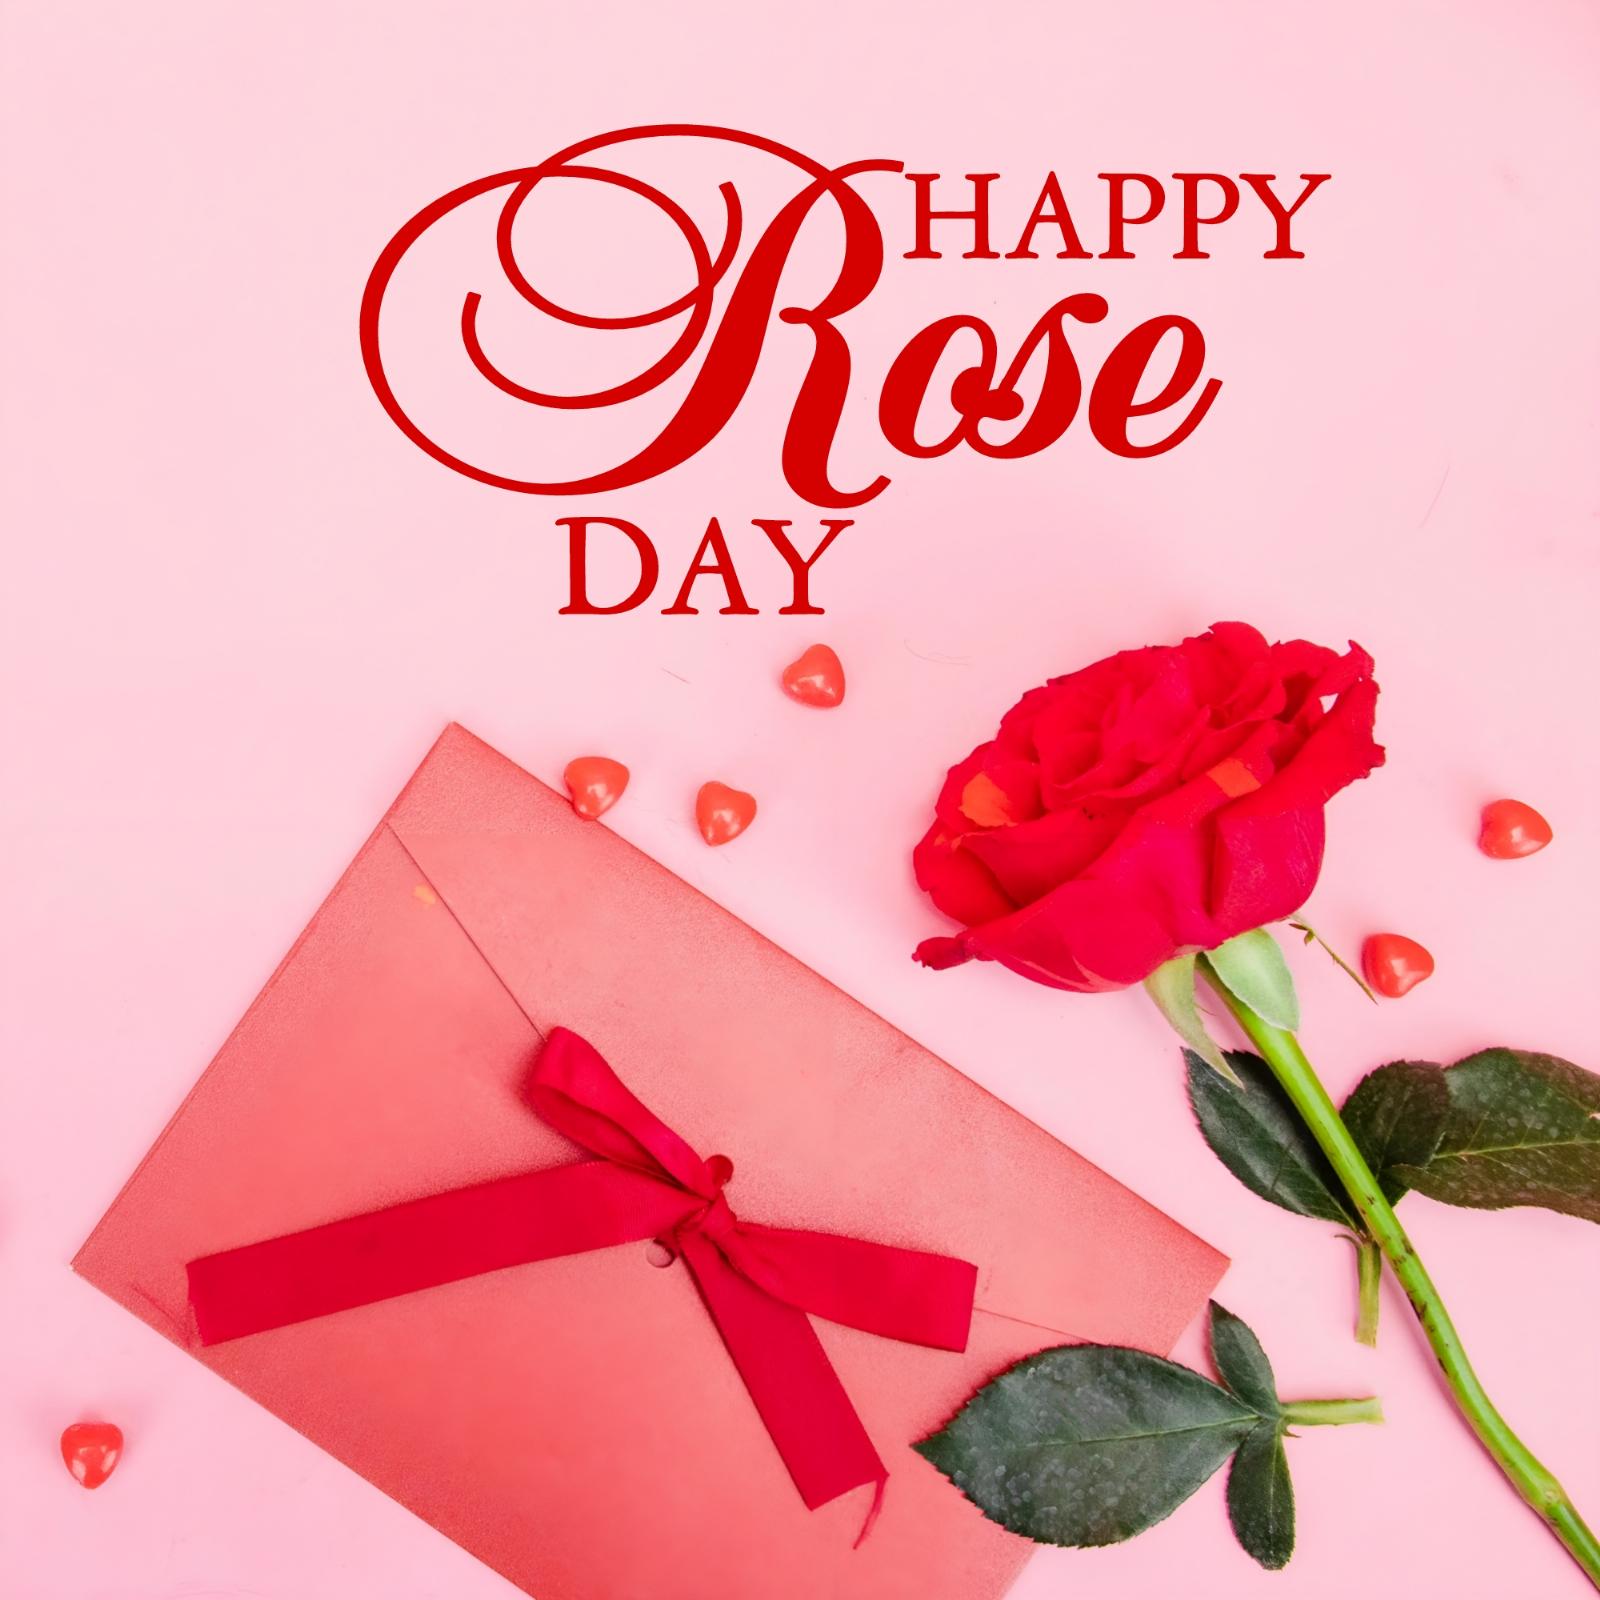 Happy Rose Day Images For Husband